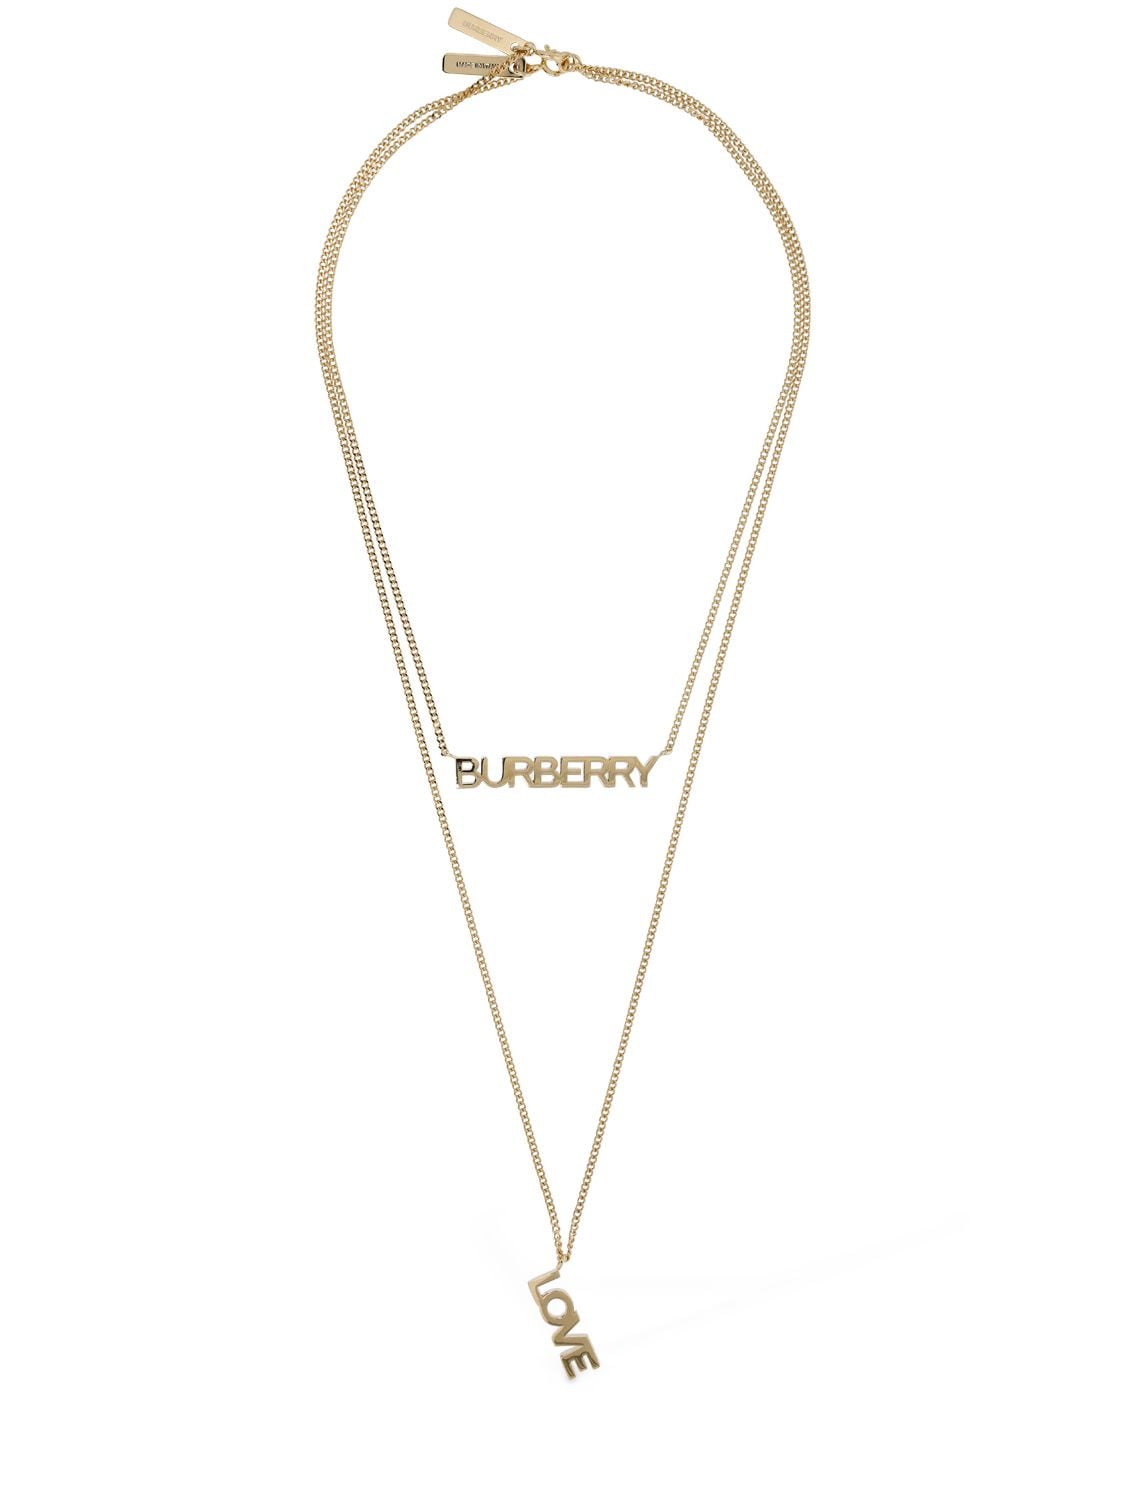 Image of Burberry & Love Letter Necklace